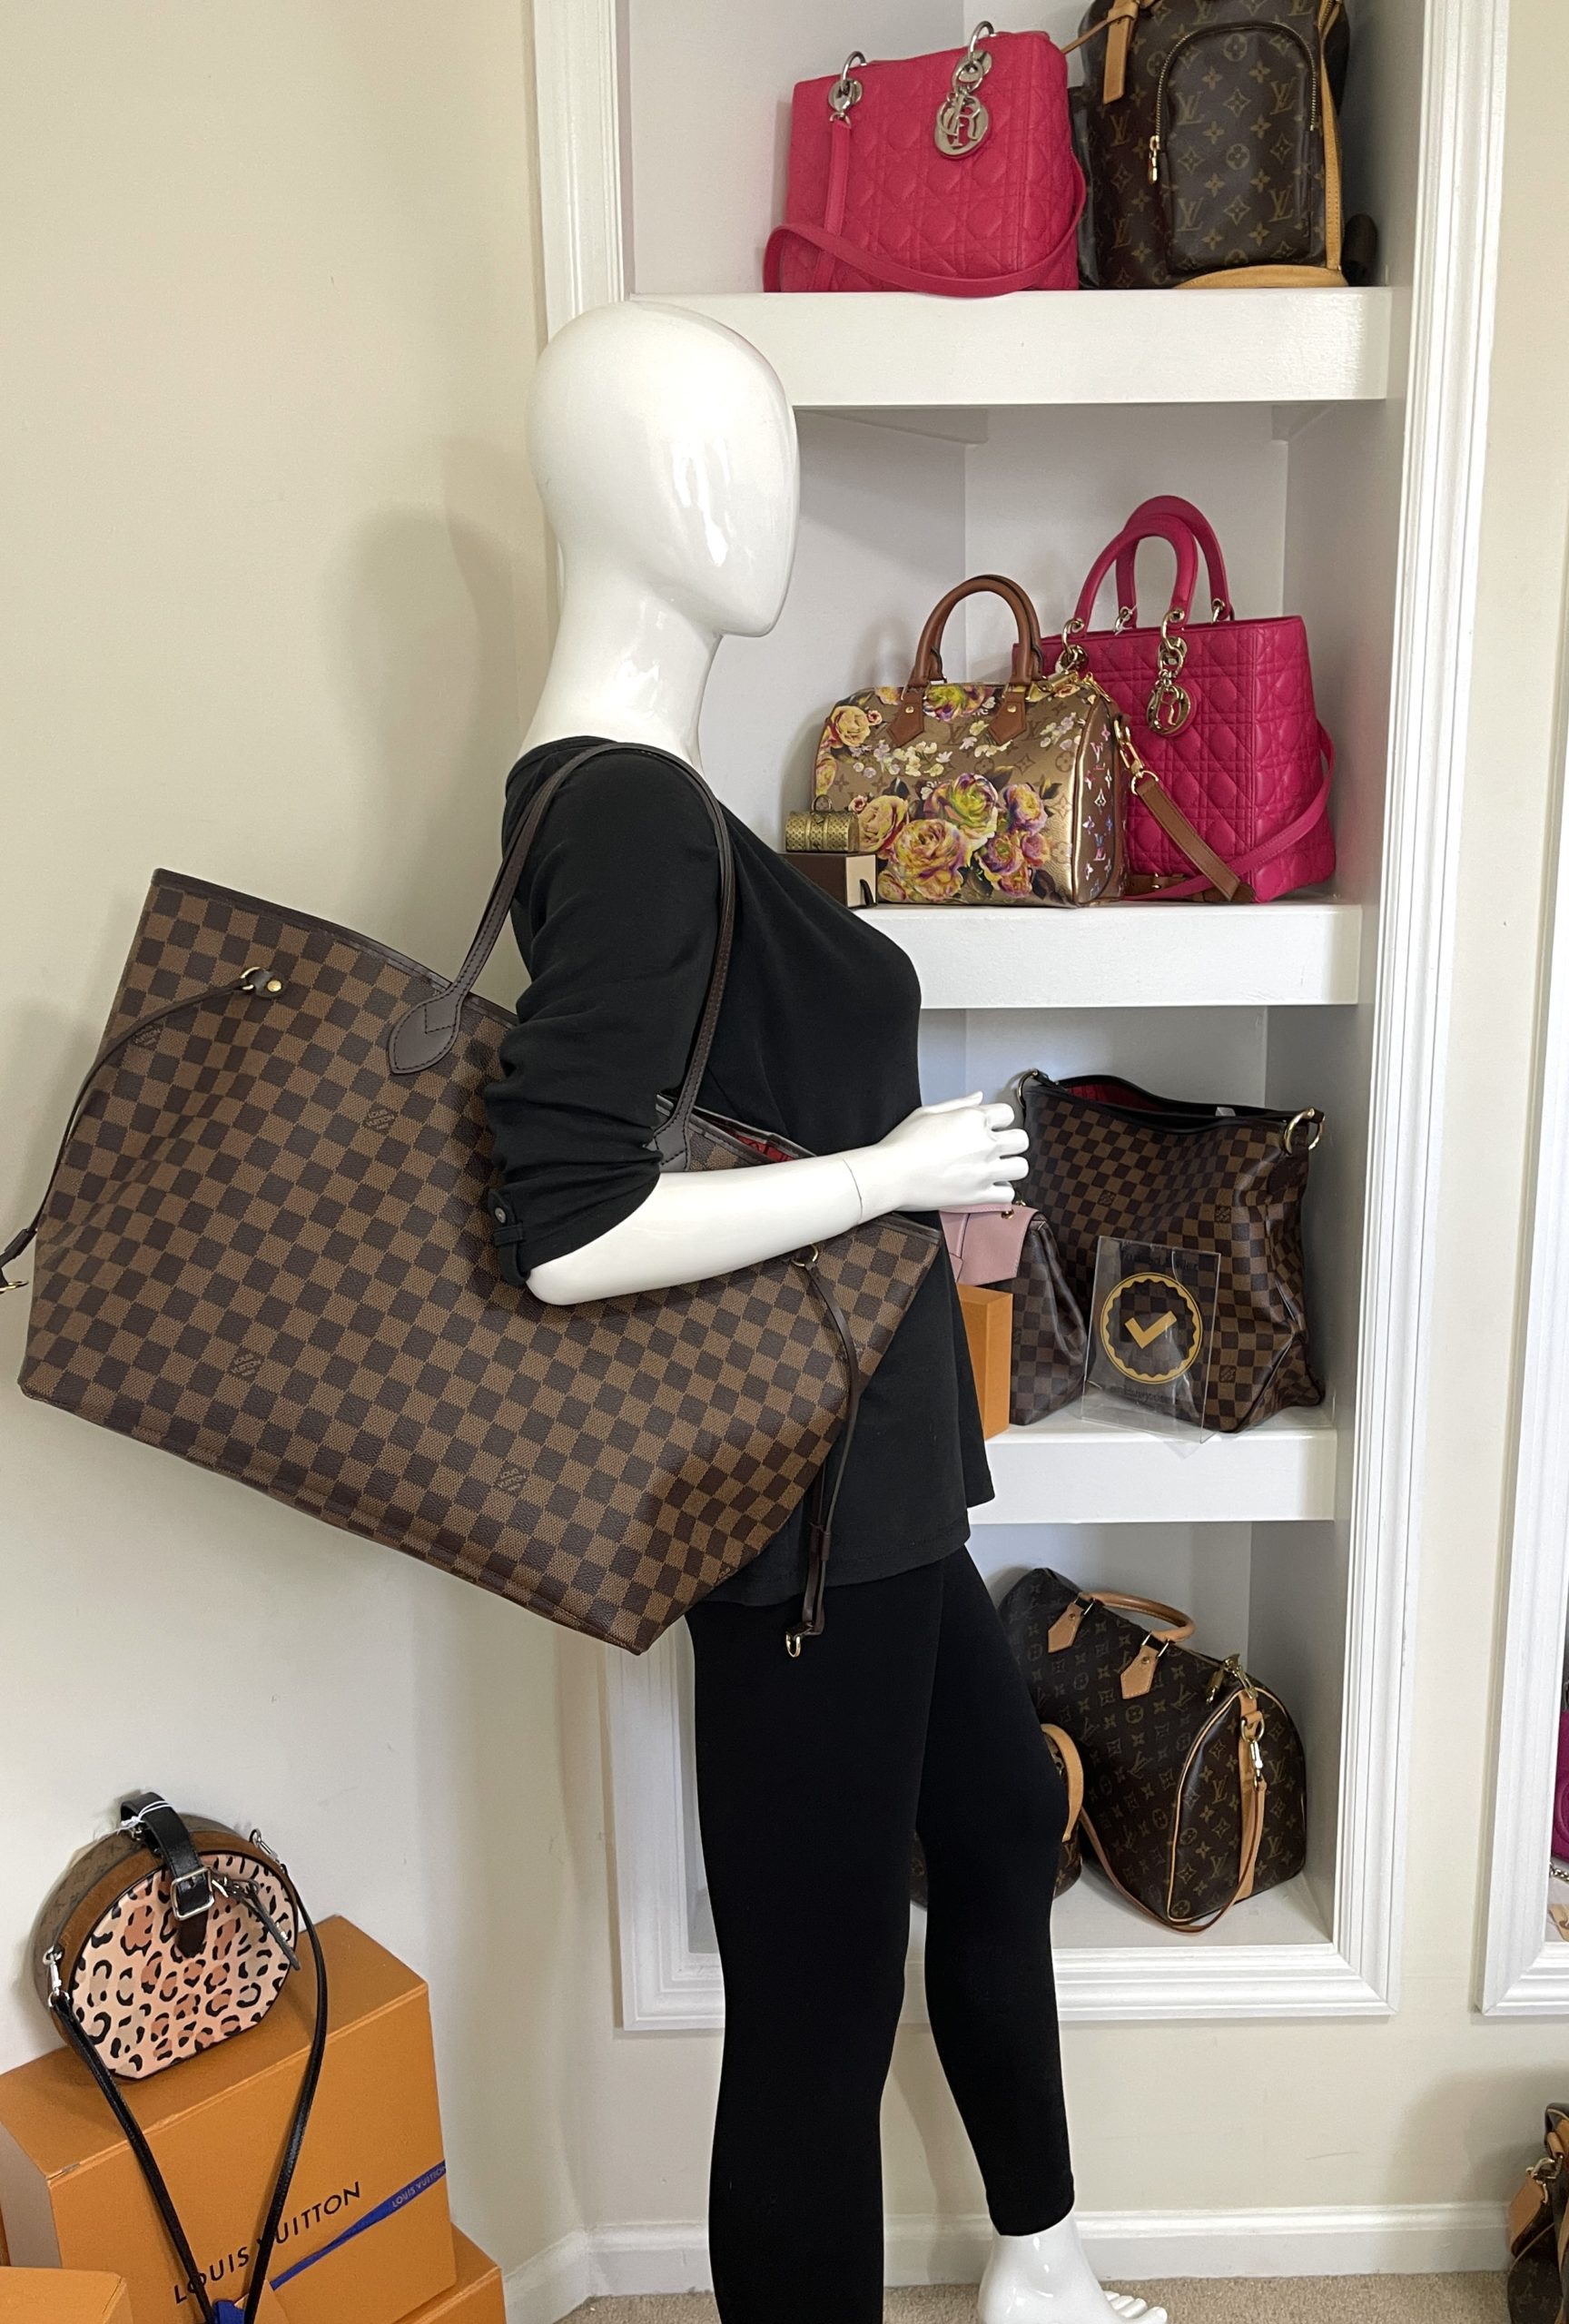 Louis Vuitton N41357 Neverfull GM Damier Ebene Coated Canvas Tote